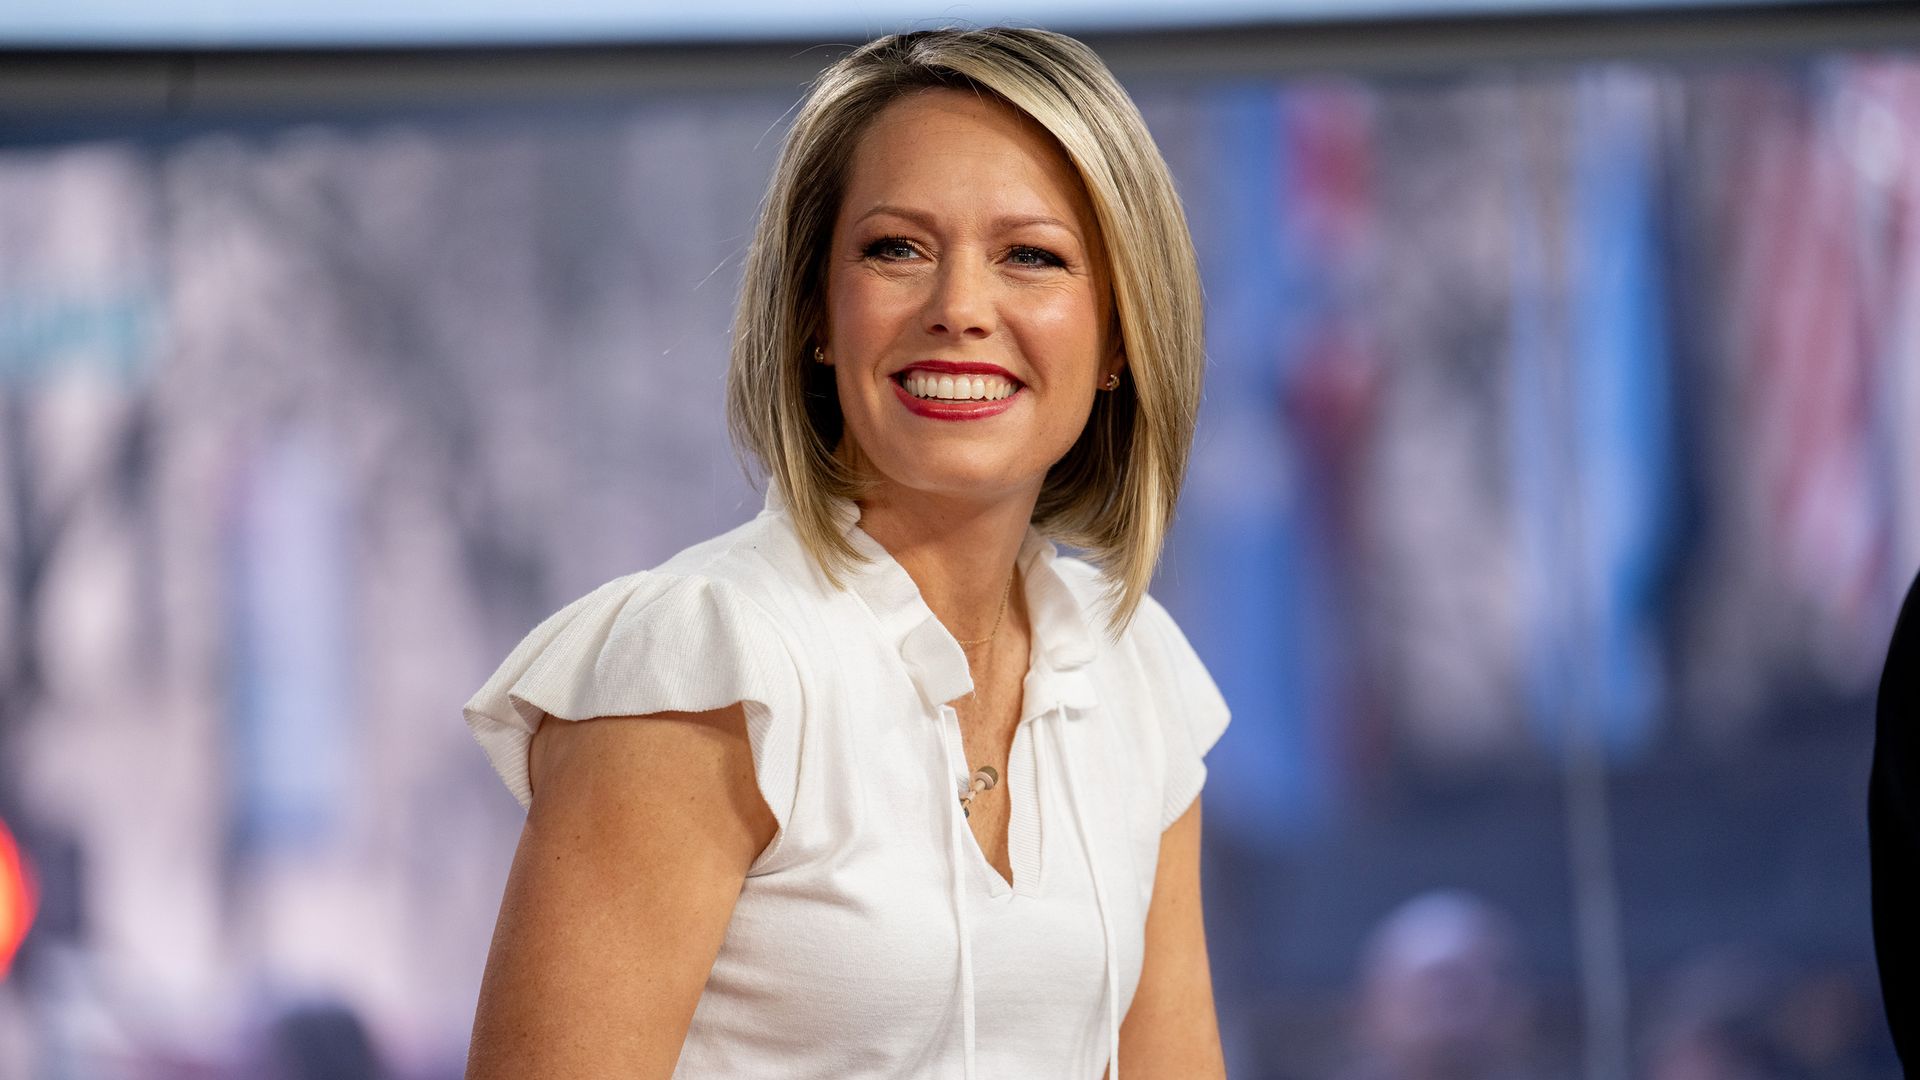 Dylan Dreyer's eagle-eyed fans wonder the same thing in family photo